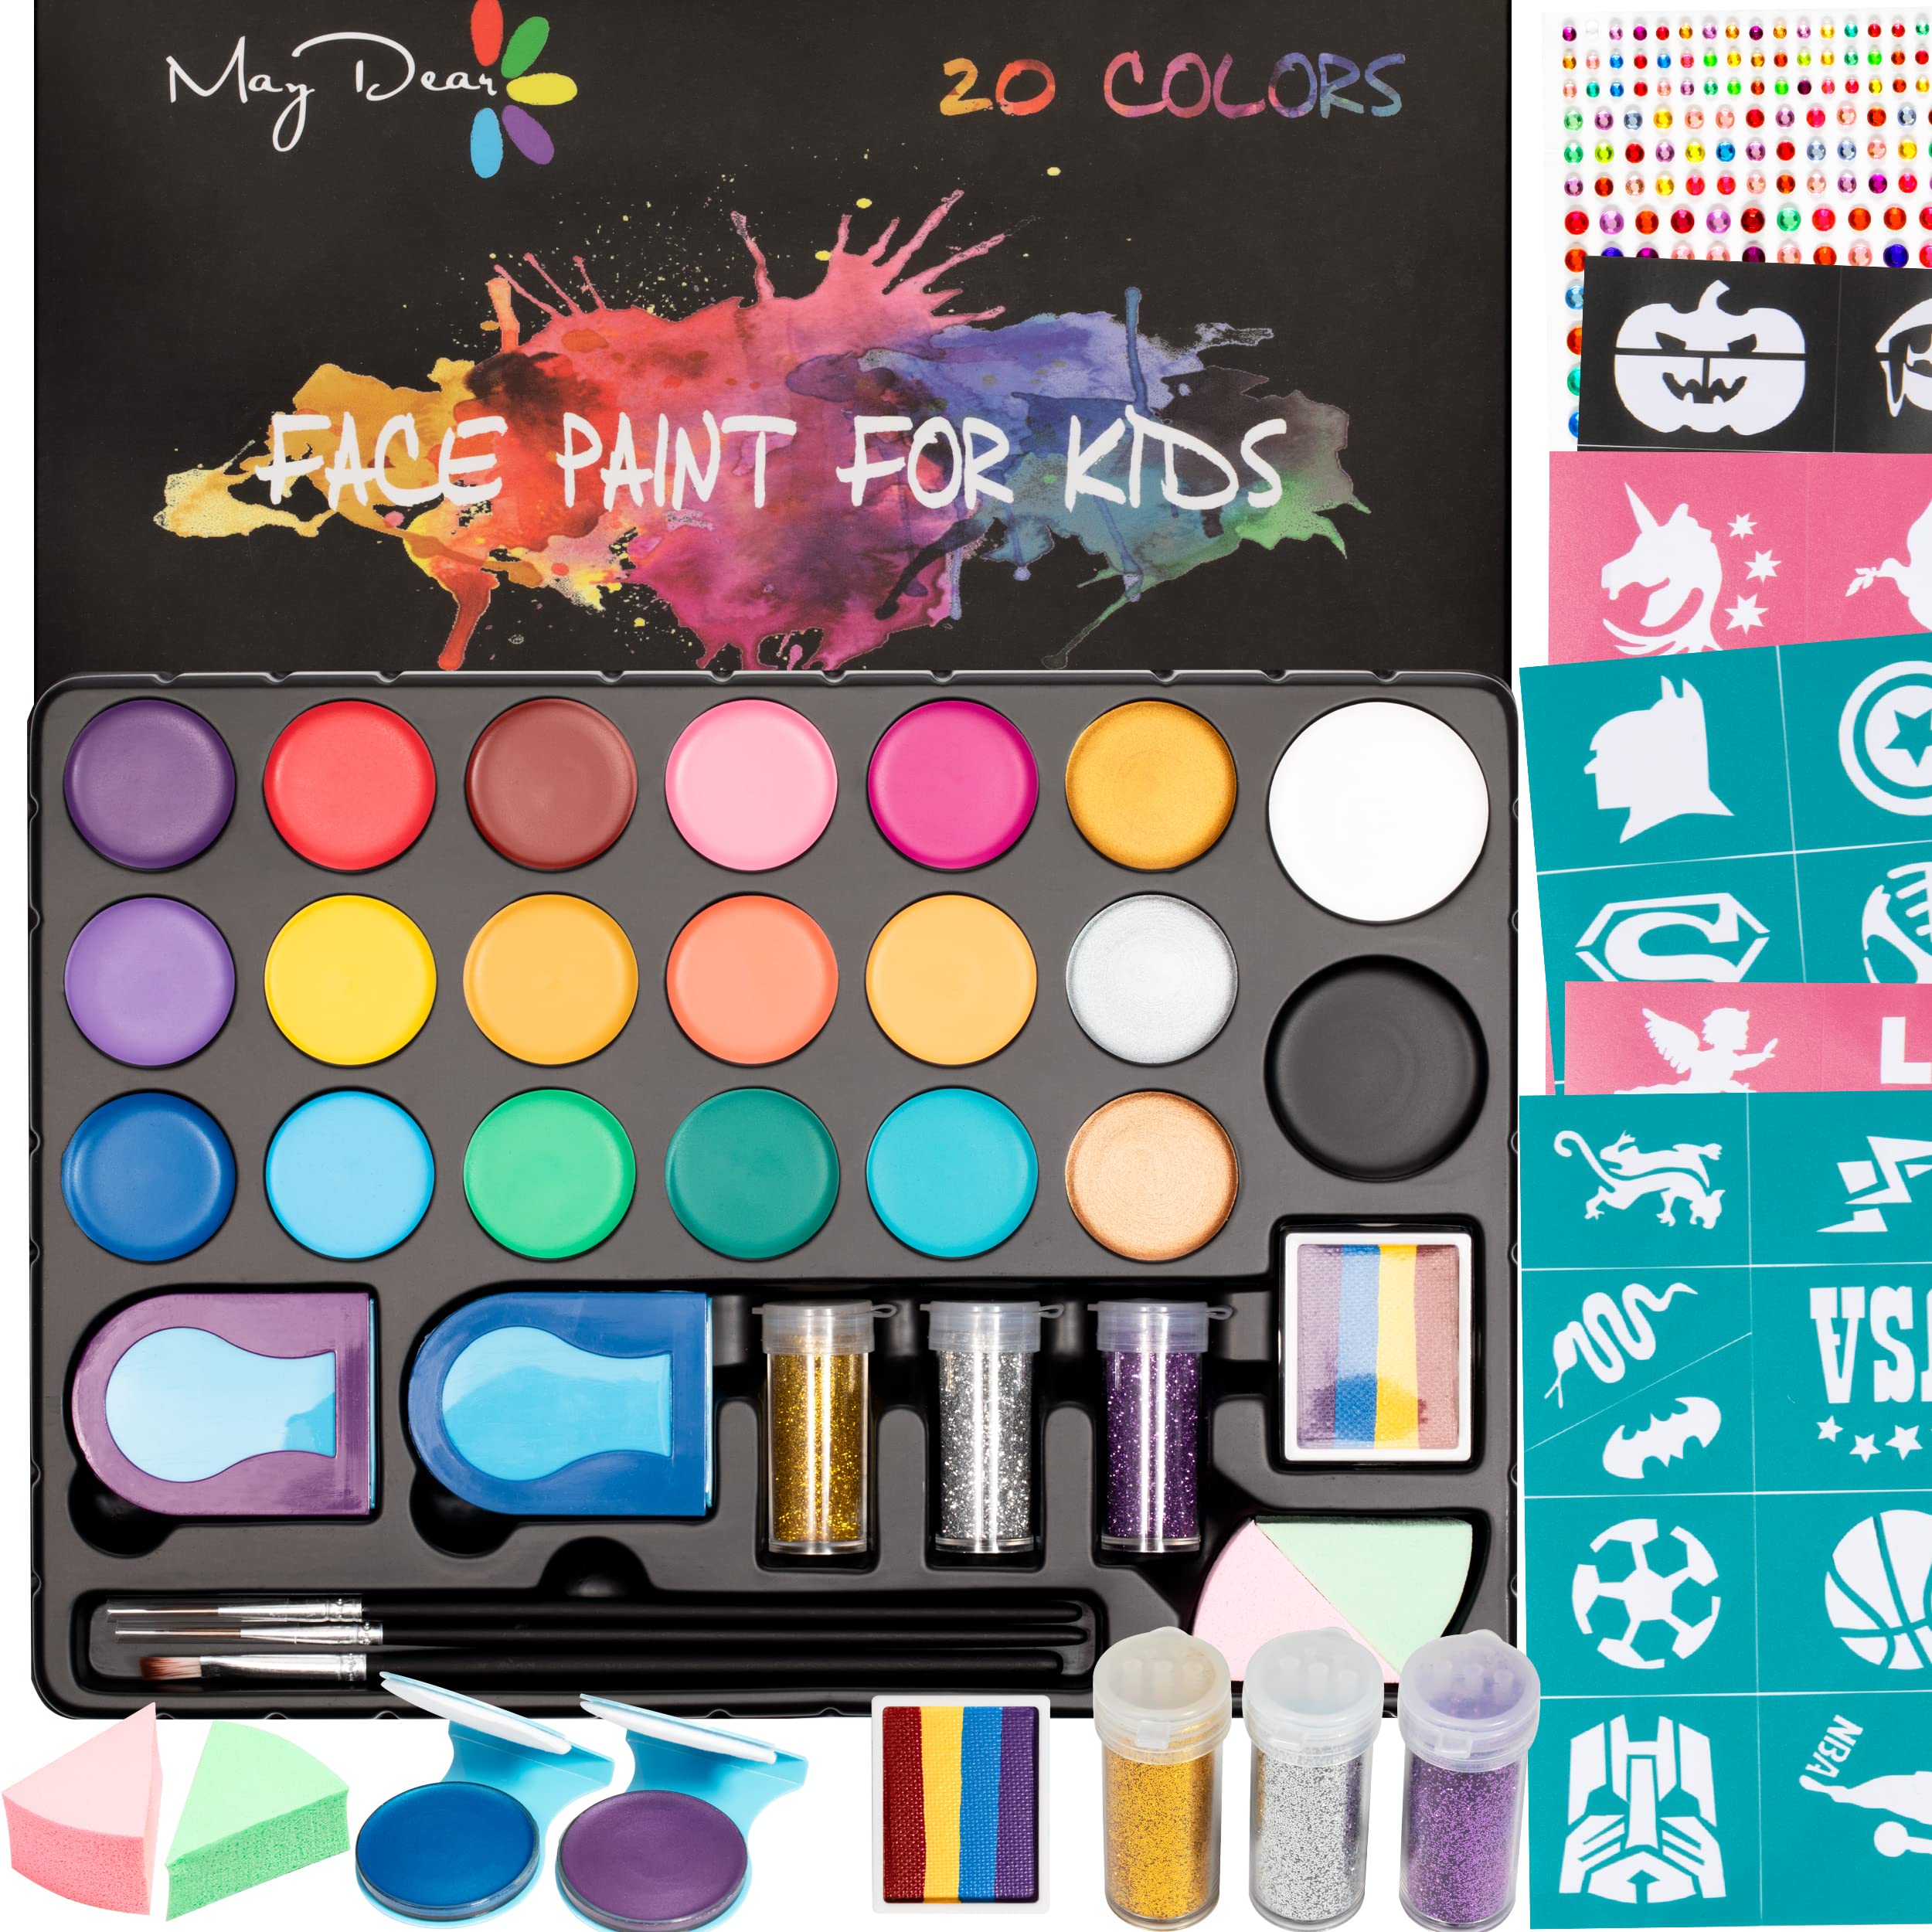 Maydear Face Paint Kit for Kids, 10 Color Safe and Non-Toxic Face